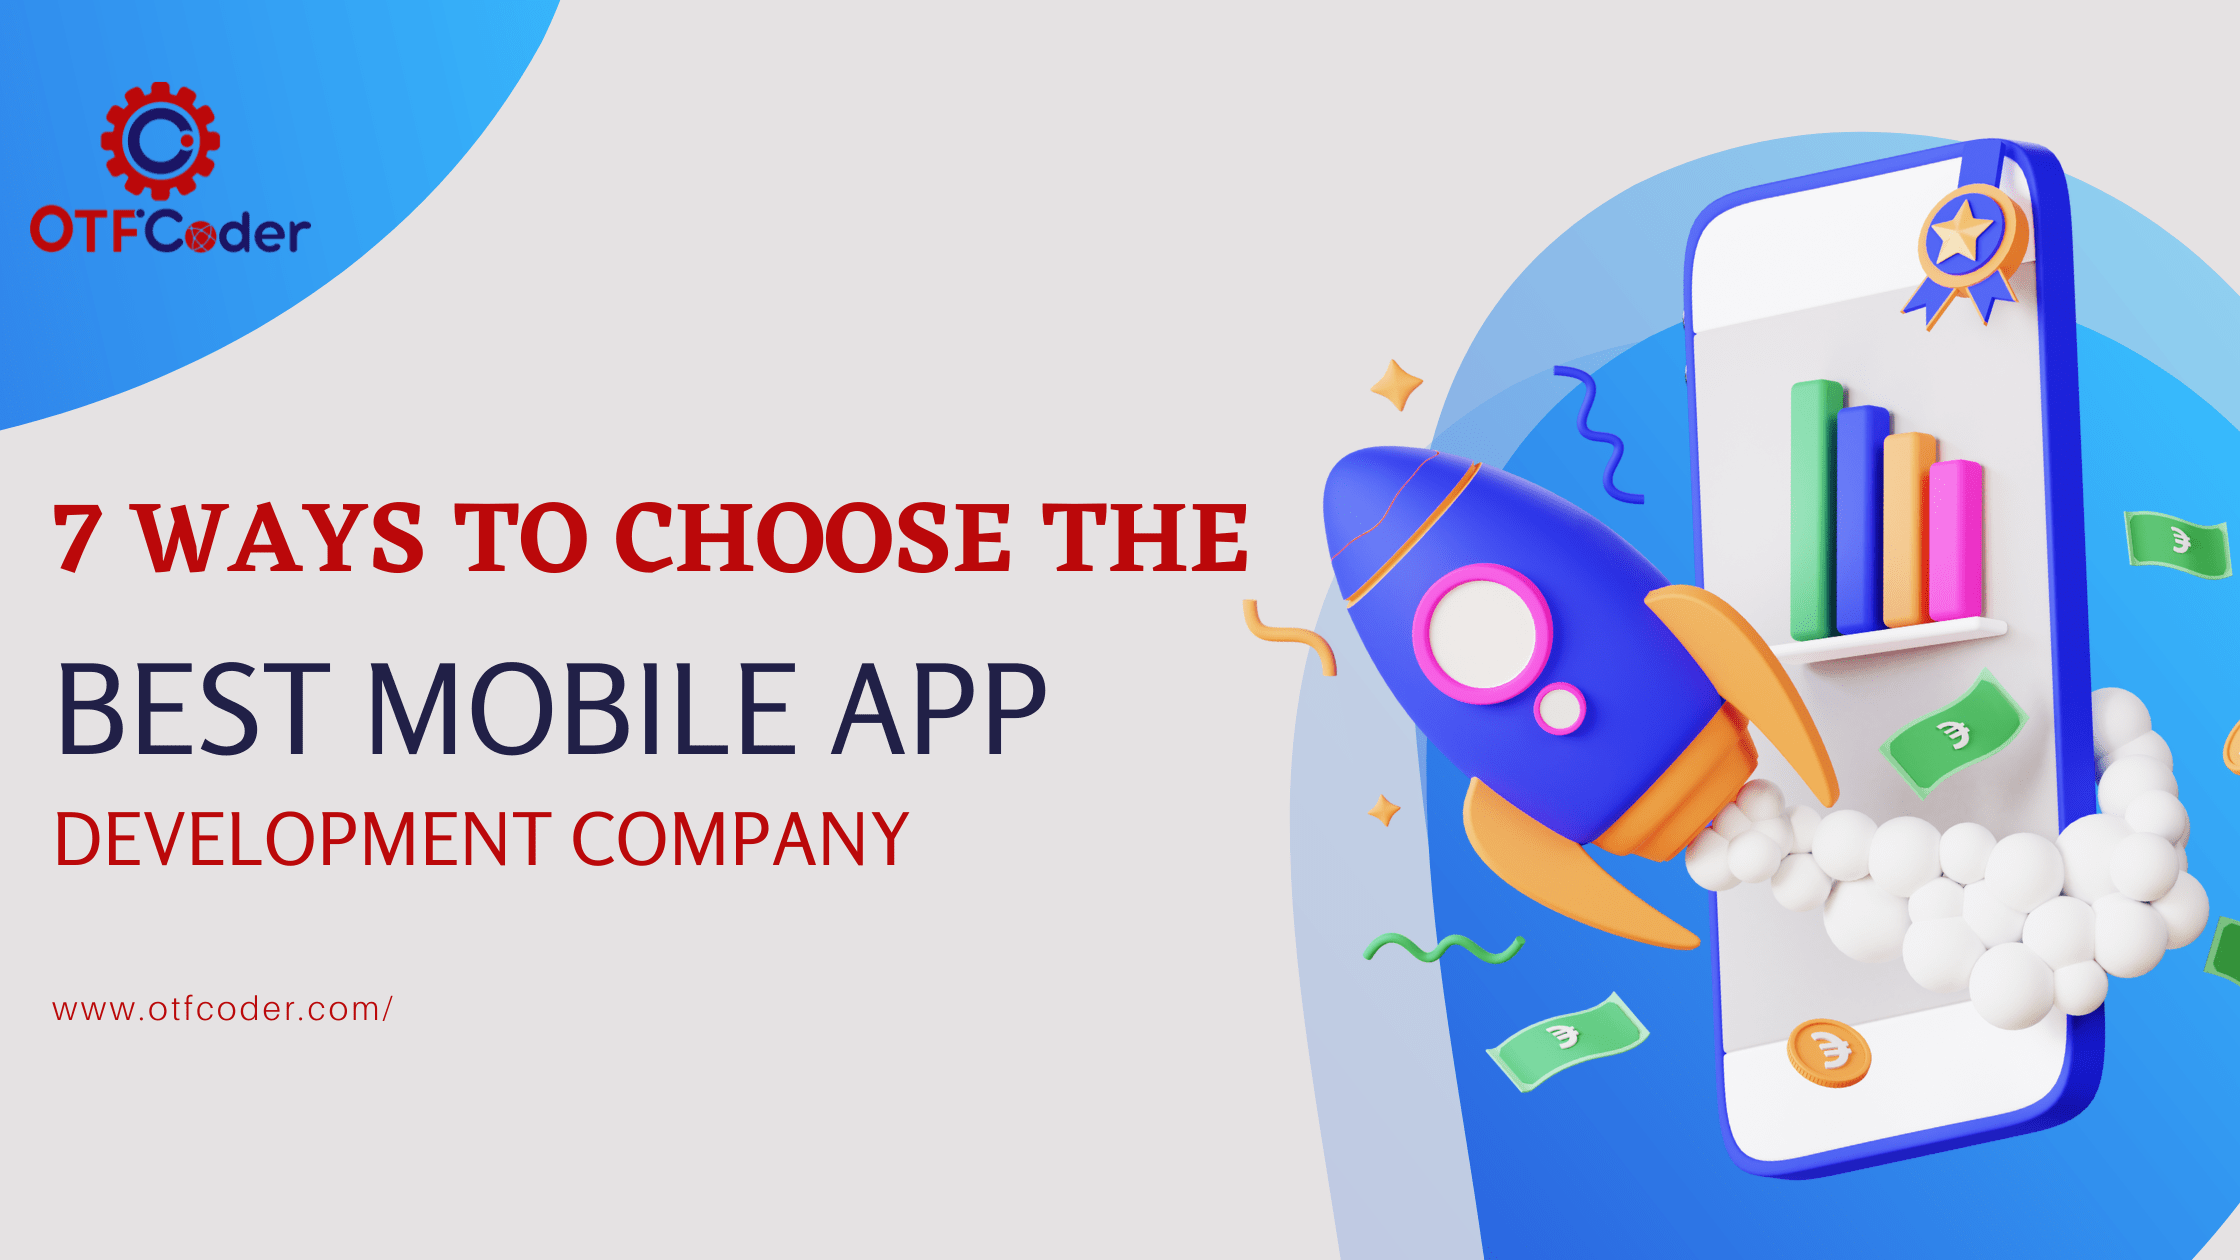 7-ways-to-choose-the-best-mobile-app-development-company